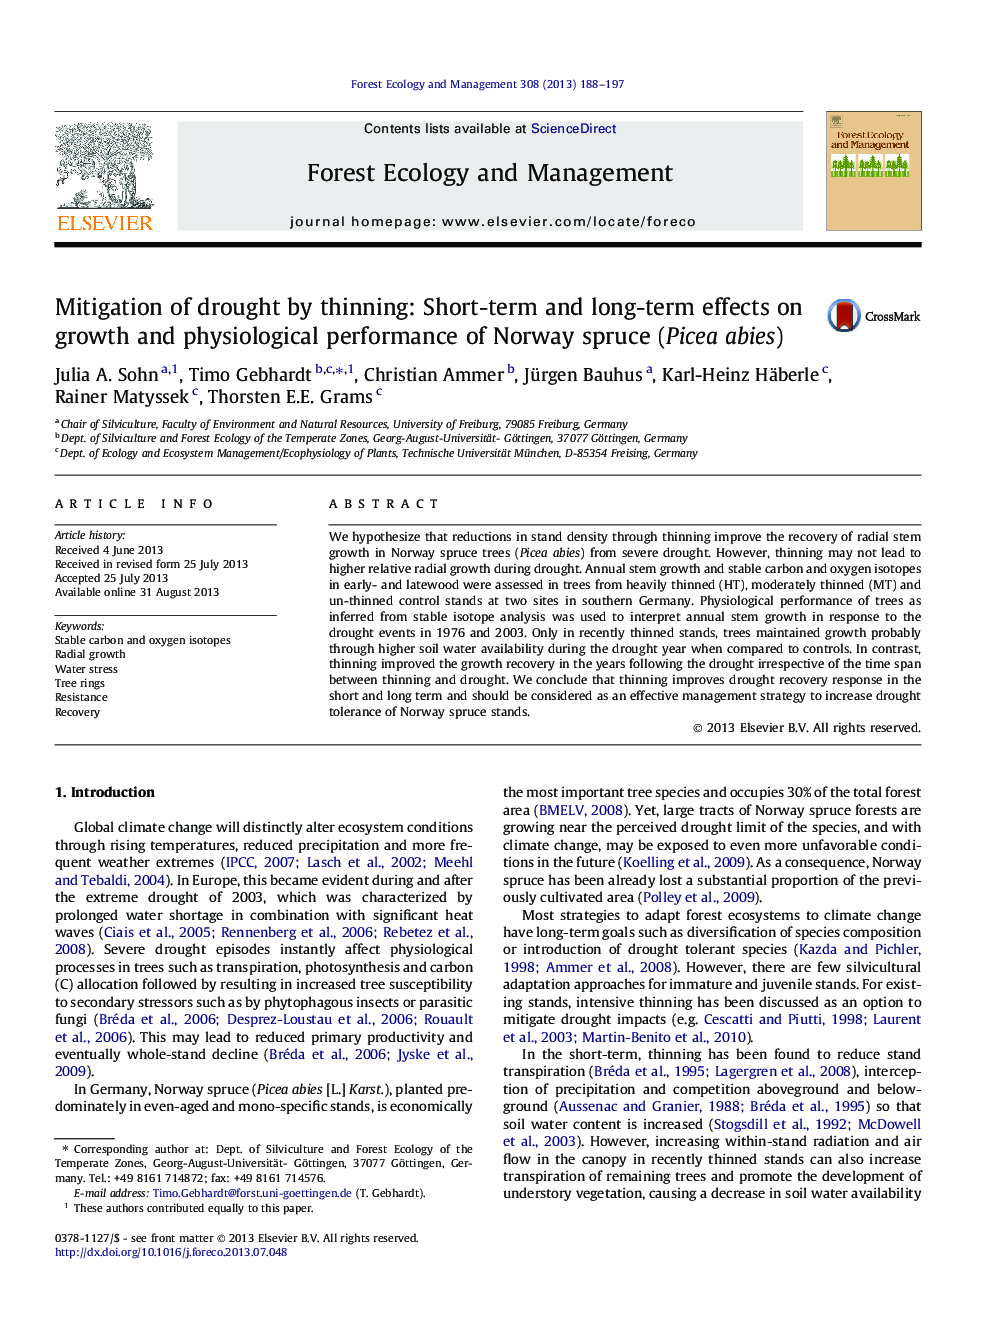 Mitigation of drought by thinning: Short-term and long-term effects on growth and physiological performance of Norway spruce (Picea abies)